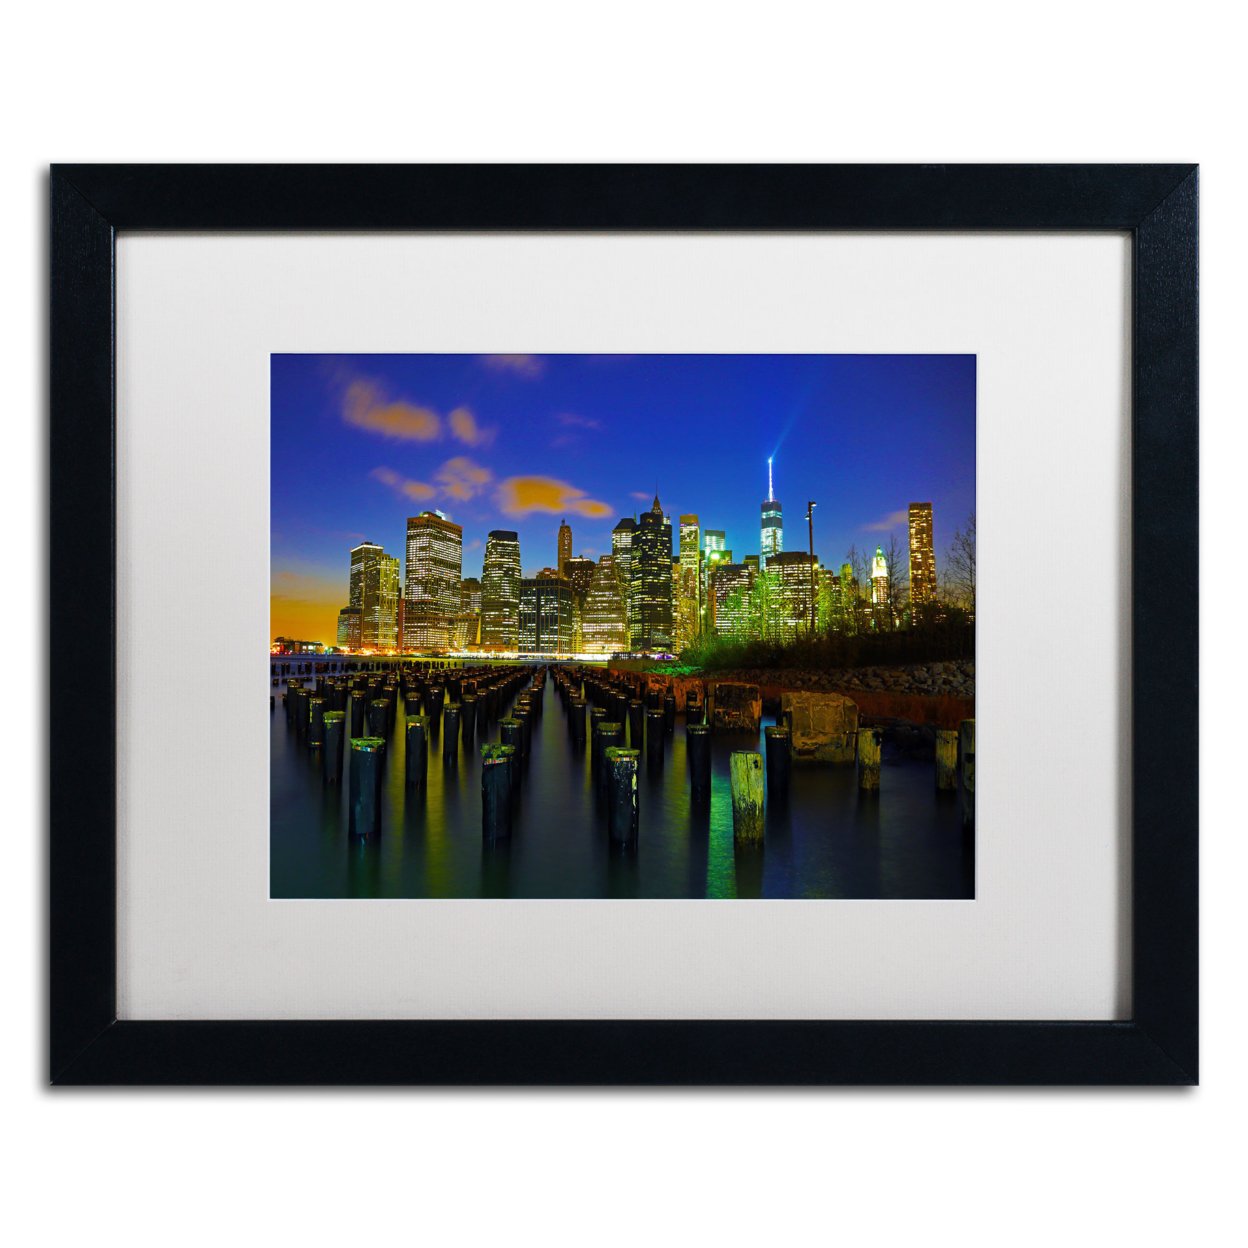 CATeyes 'City Lights 1' Black Wooden Framed Art 18 X 22 Inches